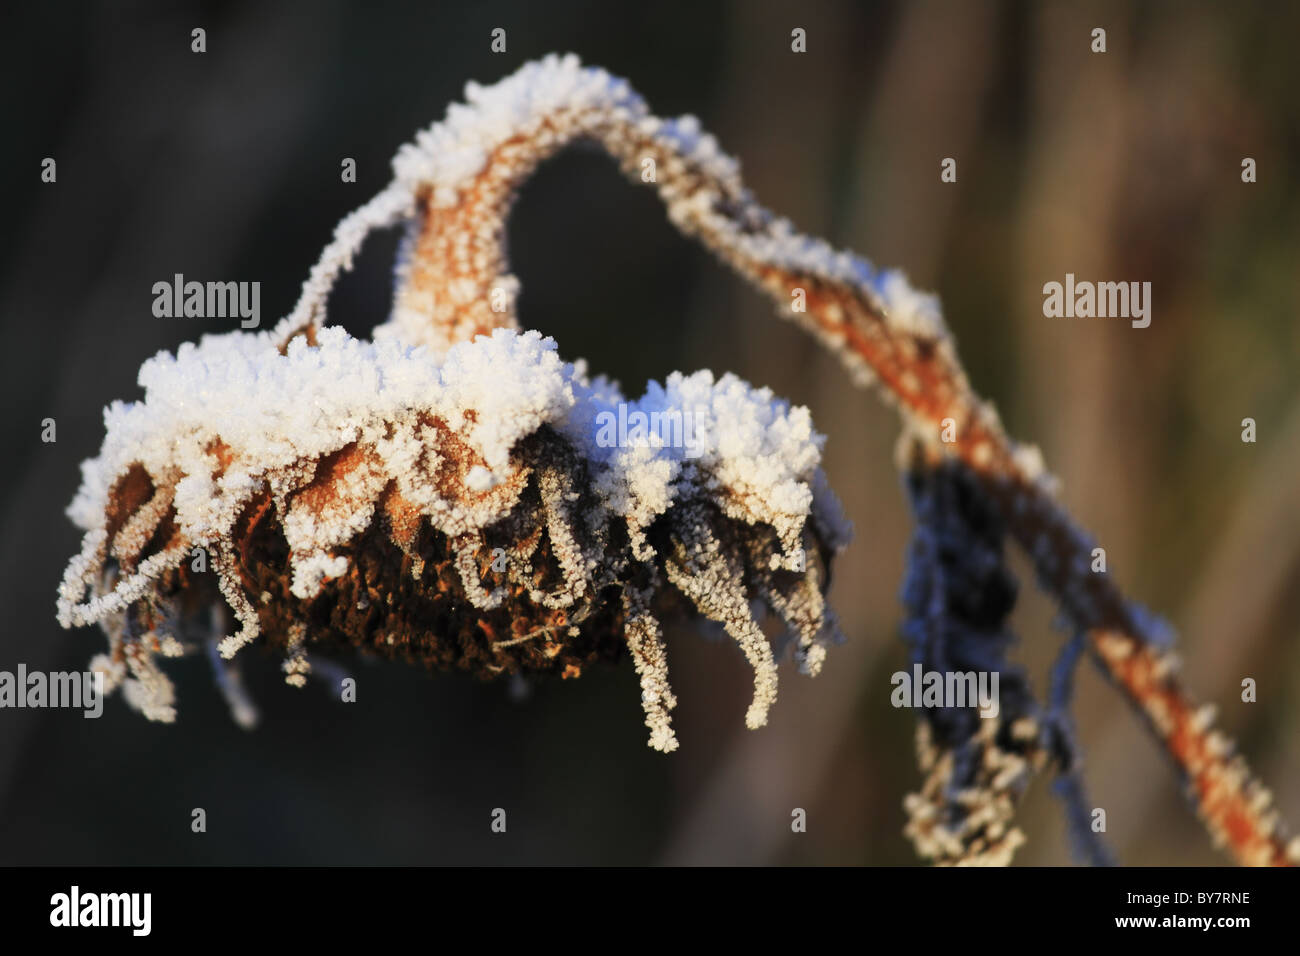 A dead sunflower head covered in frost and snow. Stock Photo